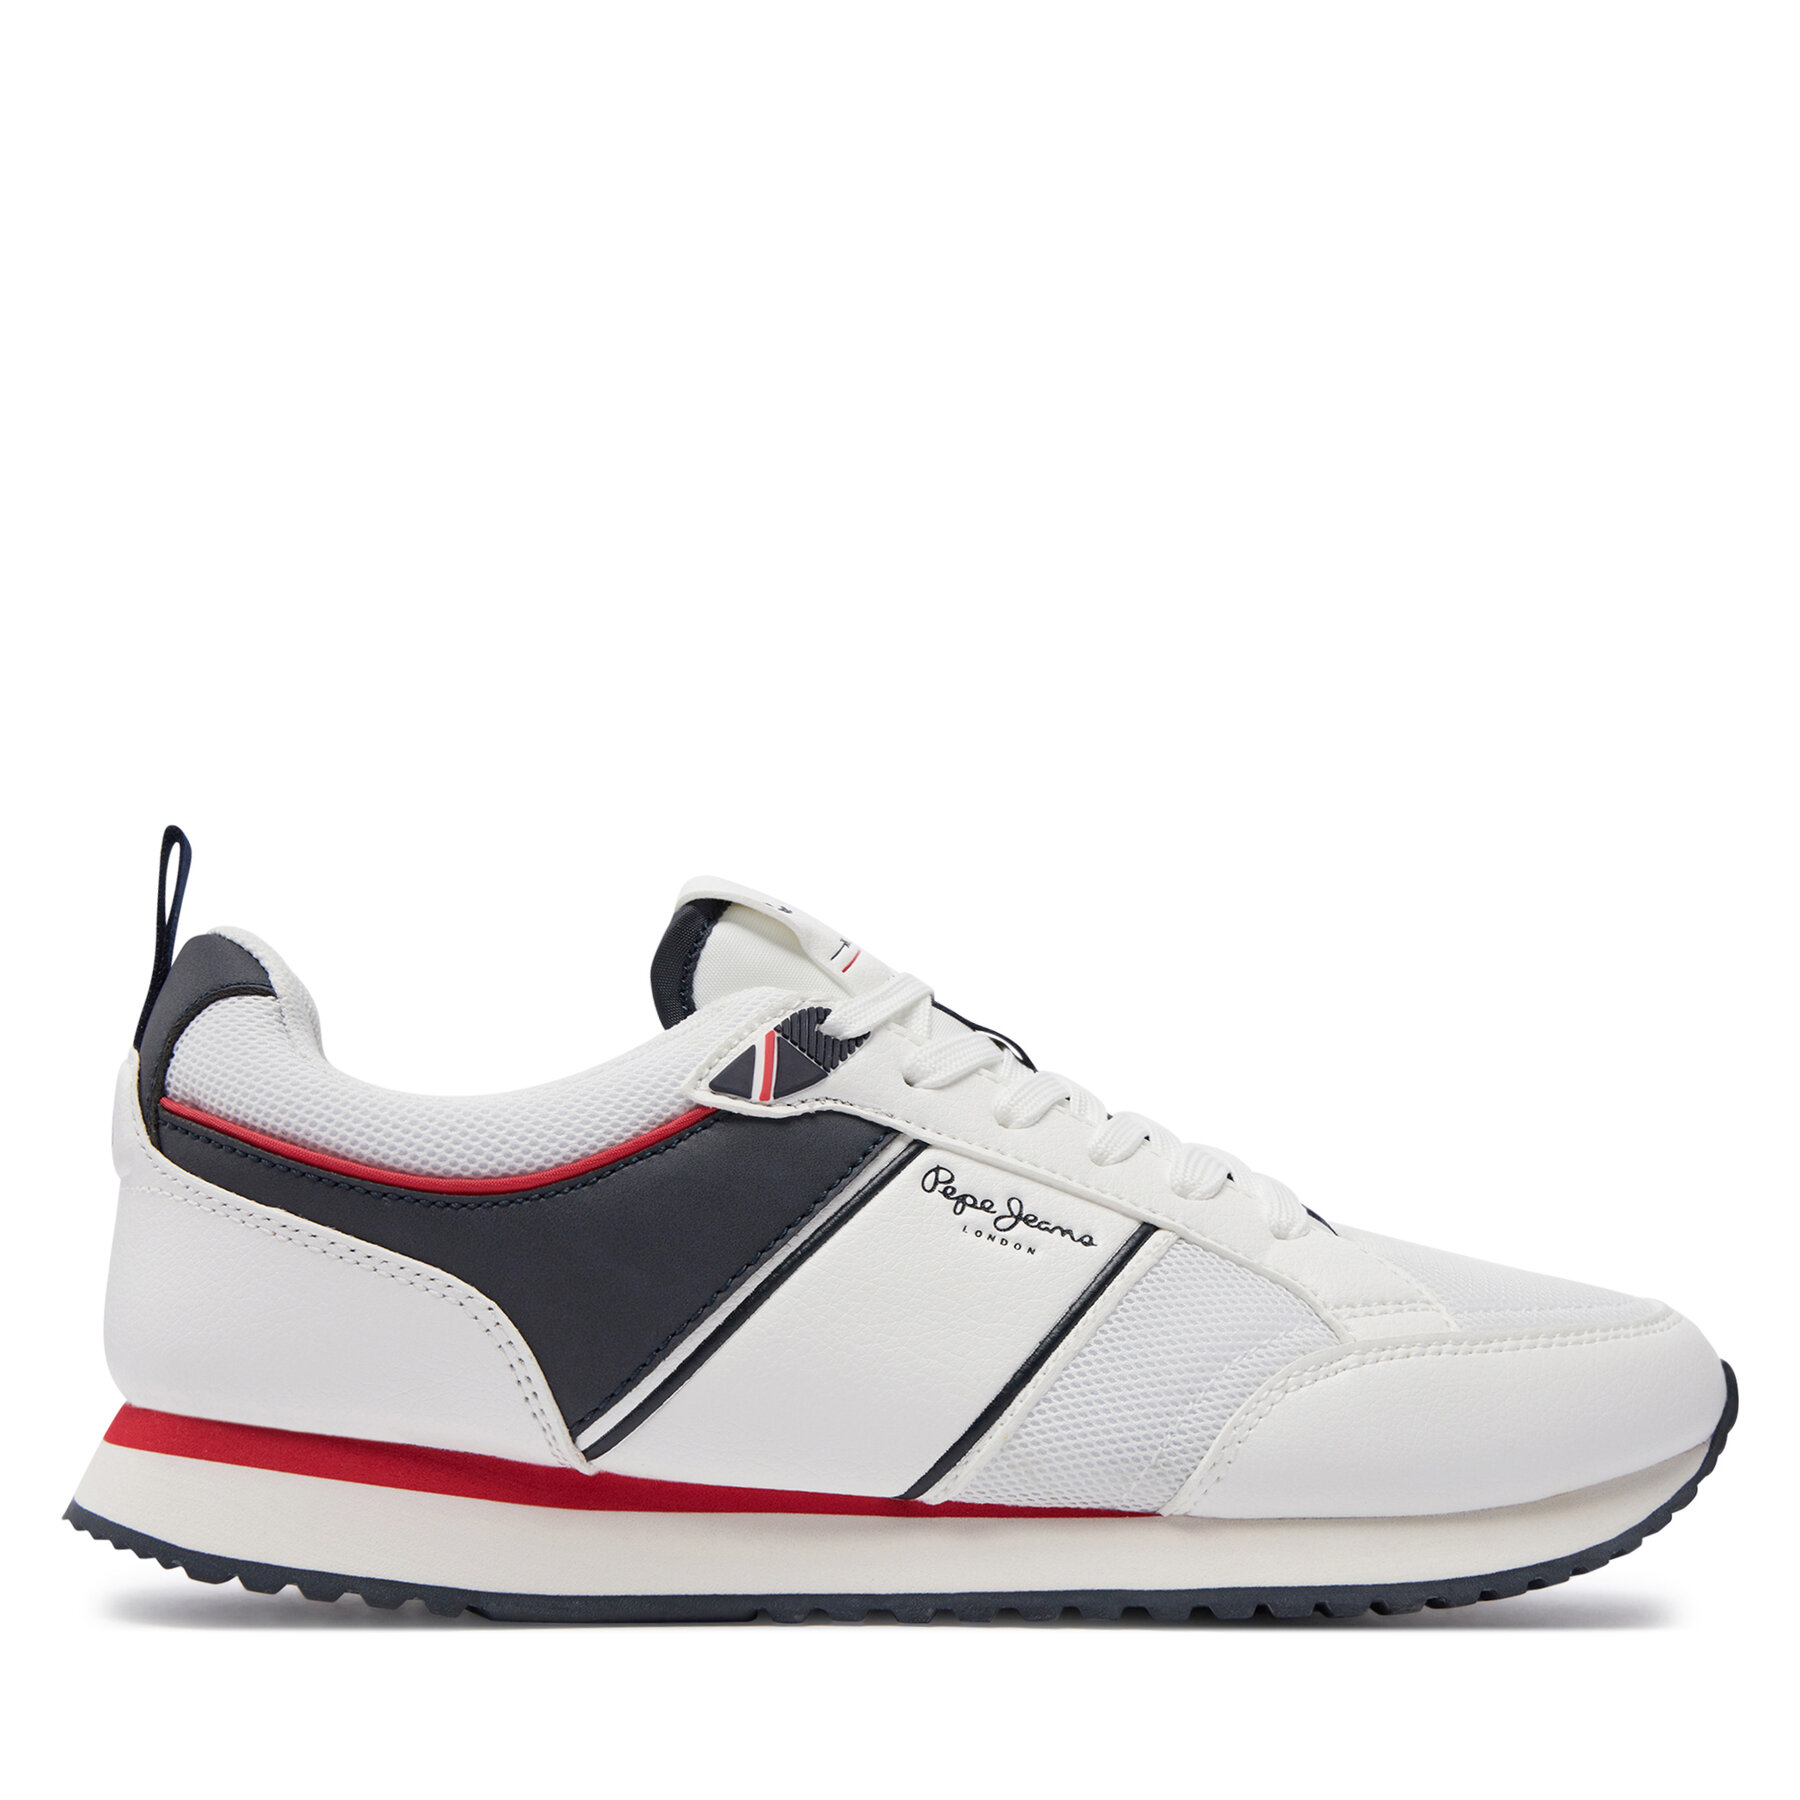 Sneakers Pepe Jeans Dublin Brand PMS40009 White 800 von Pepe Jeans